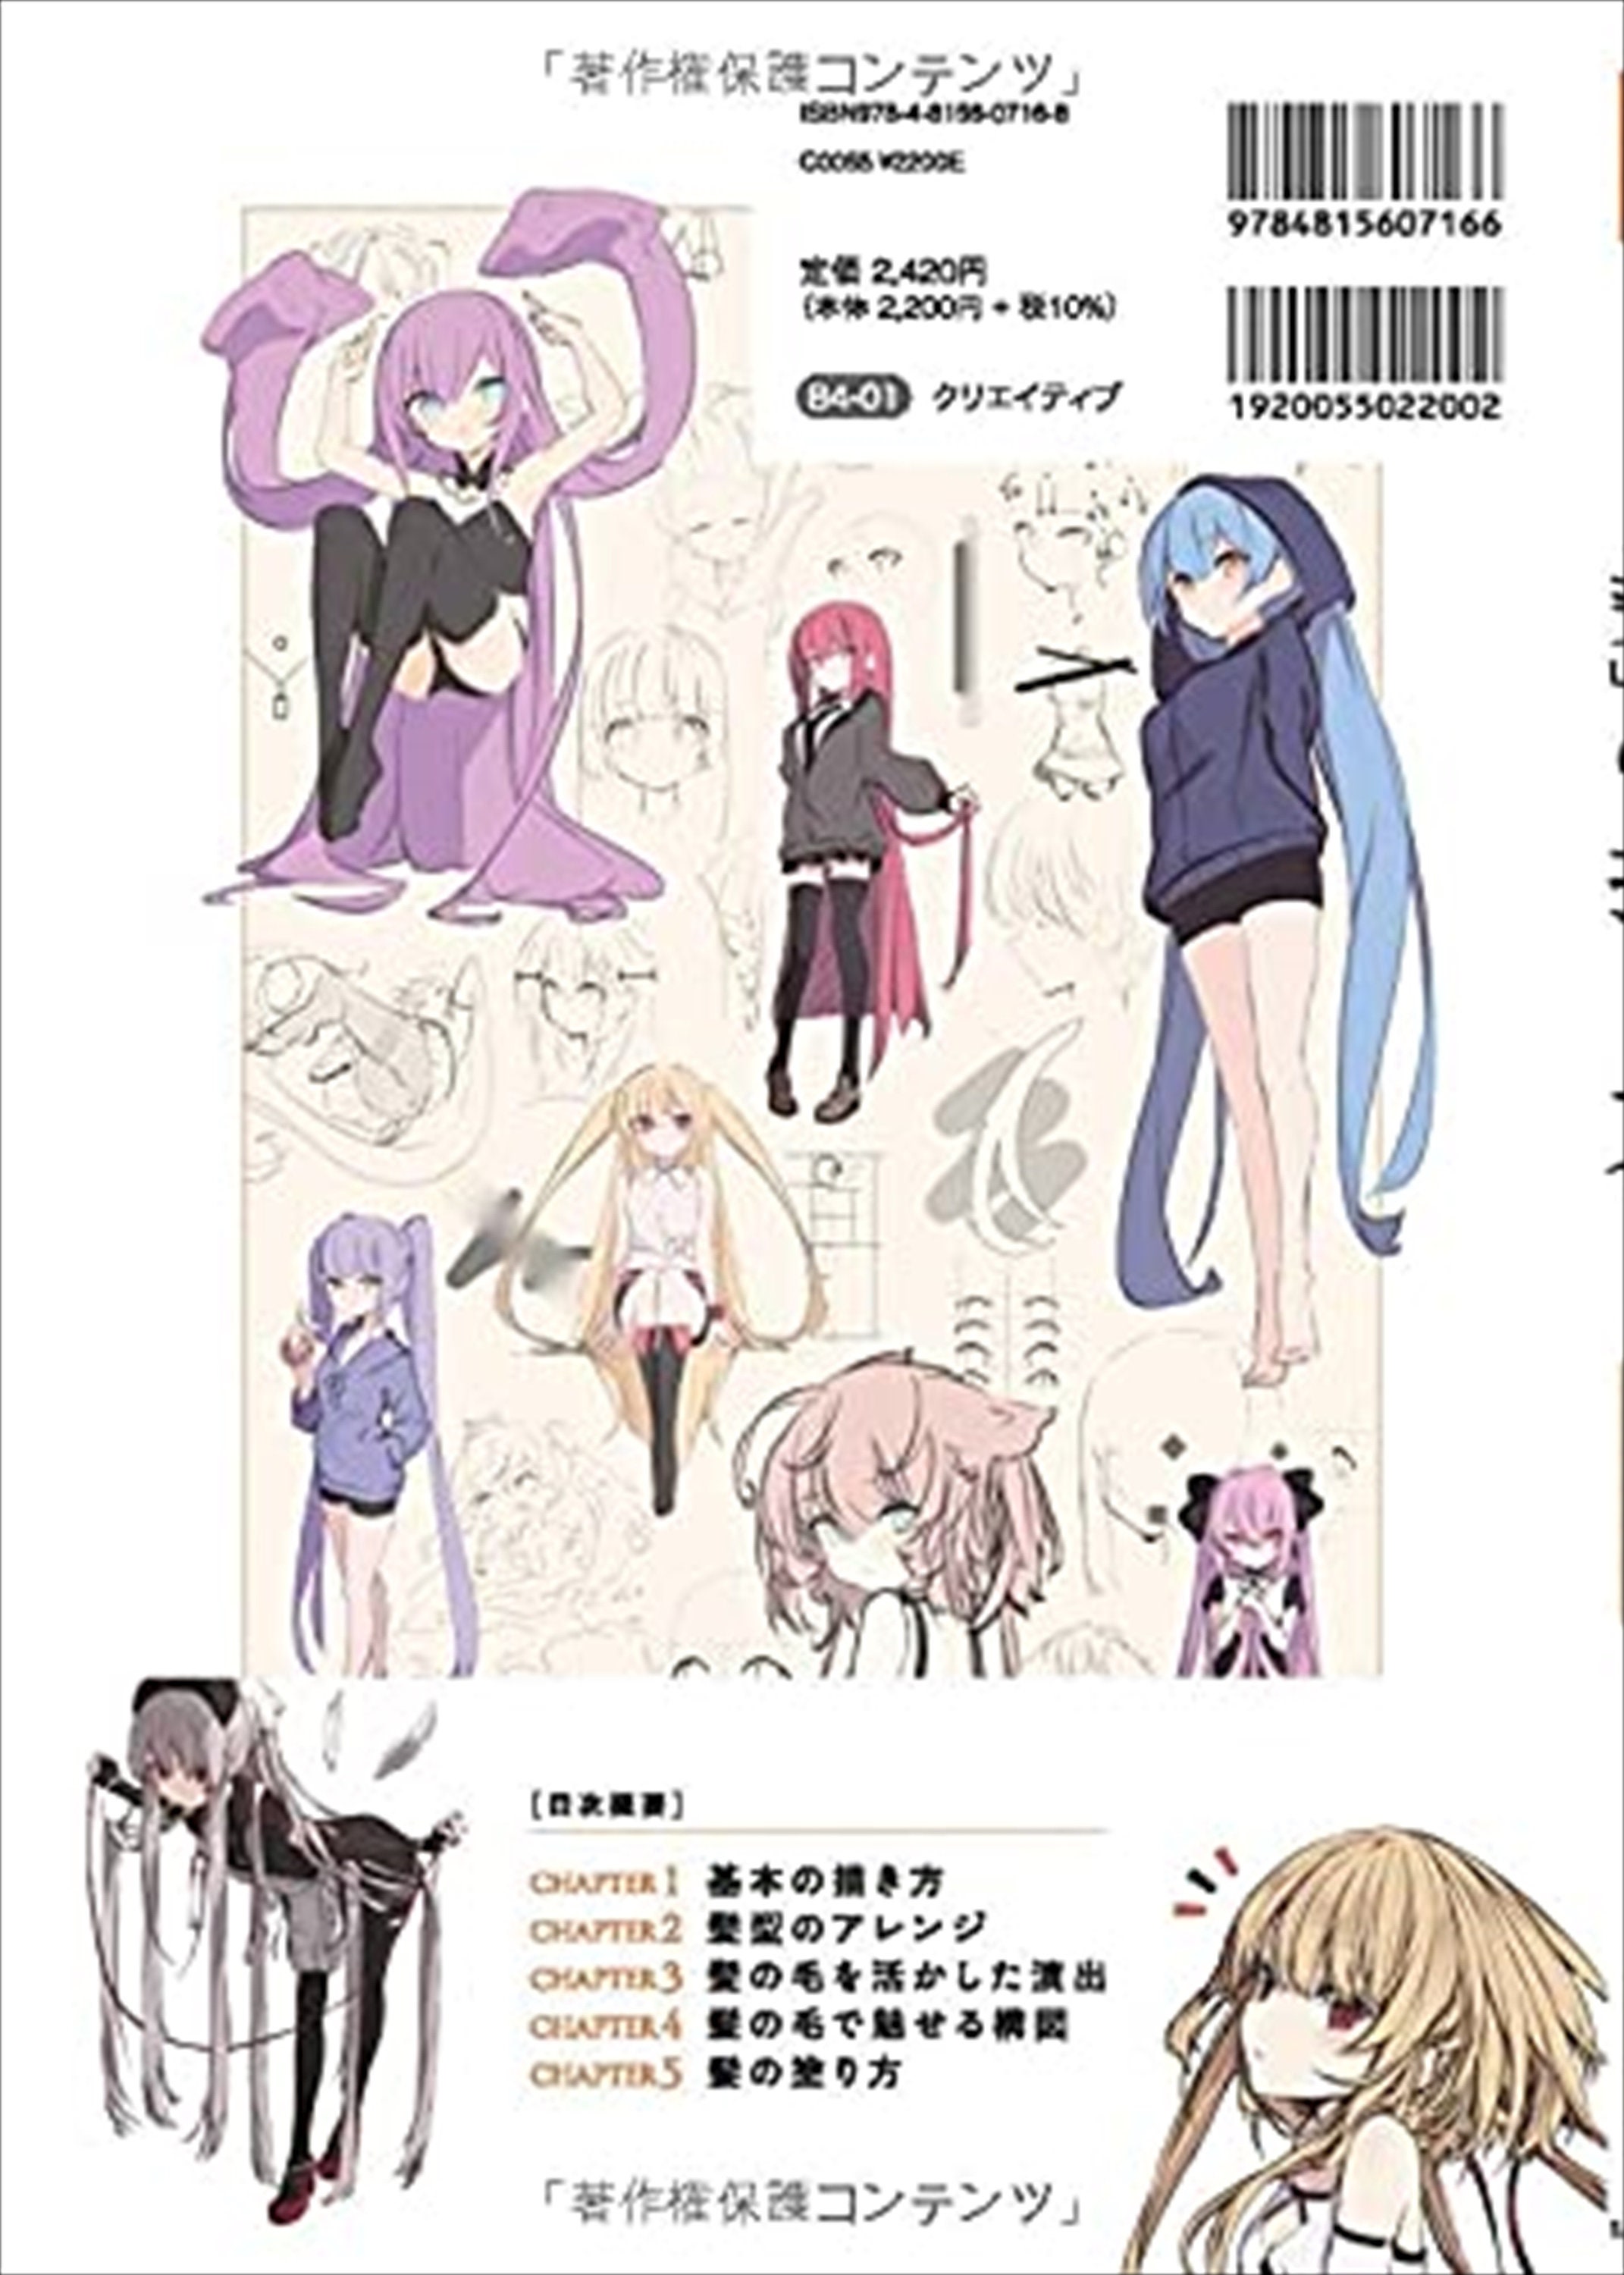 How To Draw Manga Anime Hairstyle Reference Book JAPAN Art Material